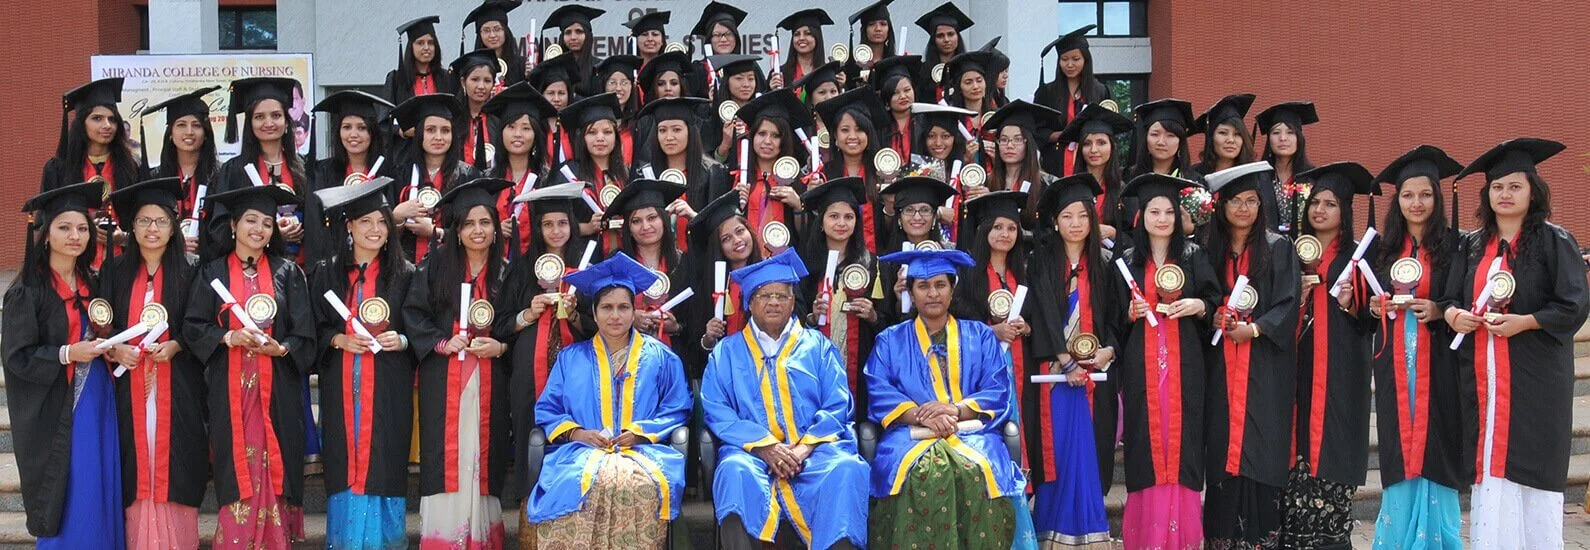 Banner Image of Graduated Students from Miranda College of Nursing in Bangalore, Highlighting Student Achievements.